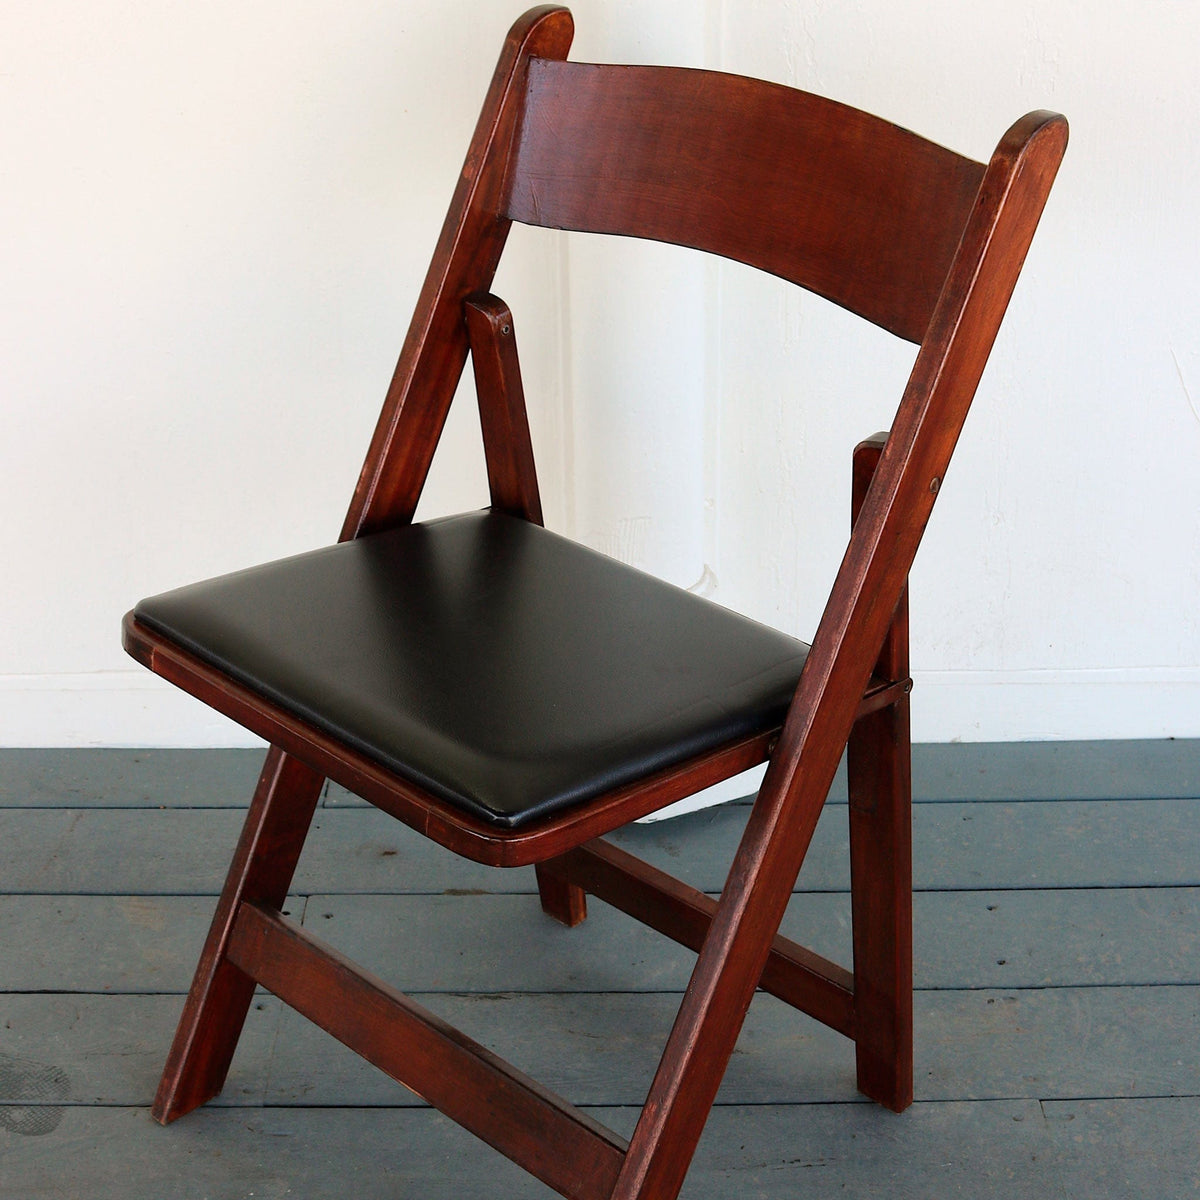 Mahogany Wooden Folding Chair with Padded Seat